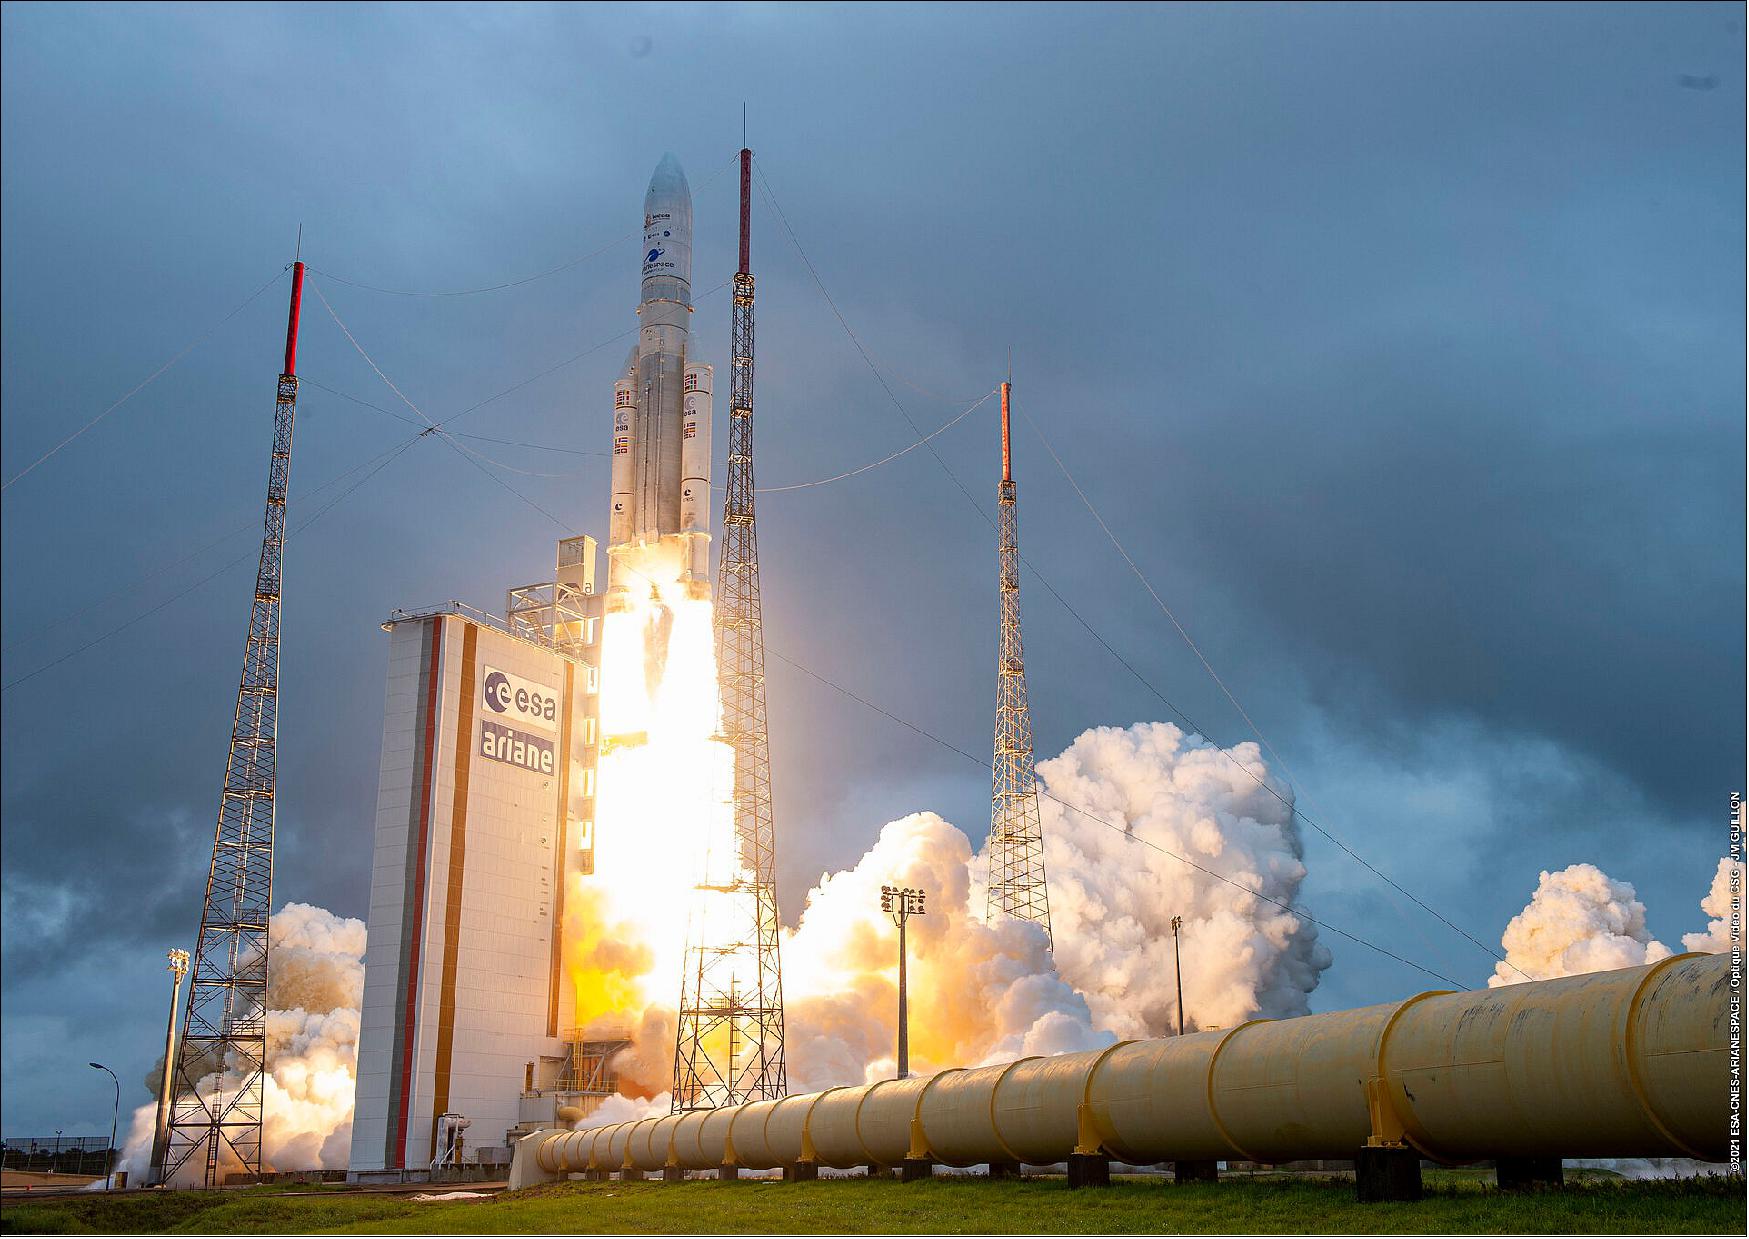 Figure 3: The James Webb Space Telescope lifted off on an Ariane 5 rocket from Europe's Spaceport in French Guiana, at 13:20 CET on 25 December on its exciting mission to unlock the secrets of the Universe (image credit: ESA/CNES/Arianespace)